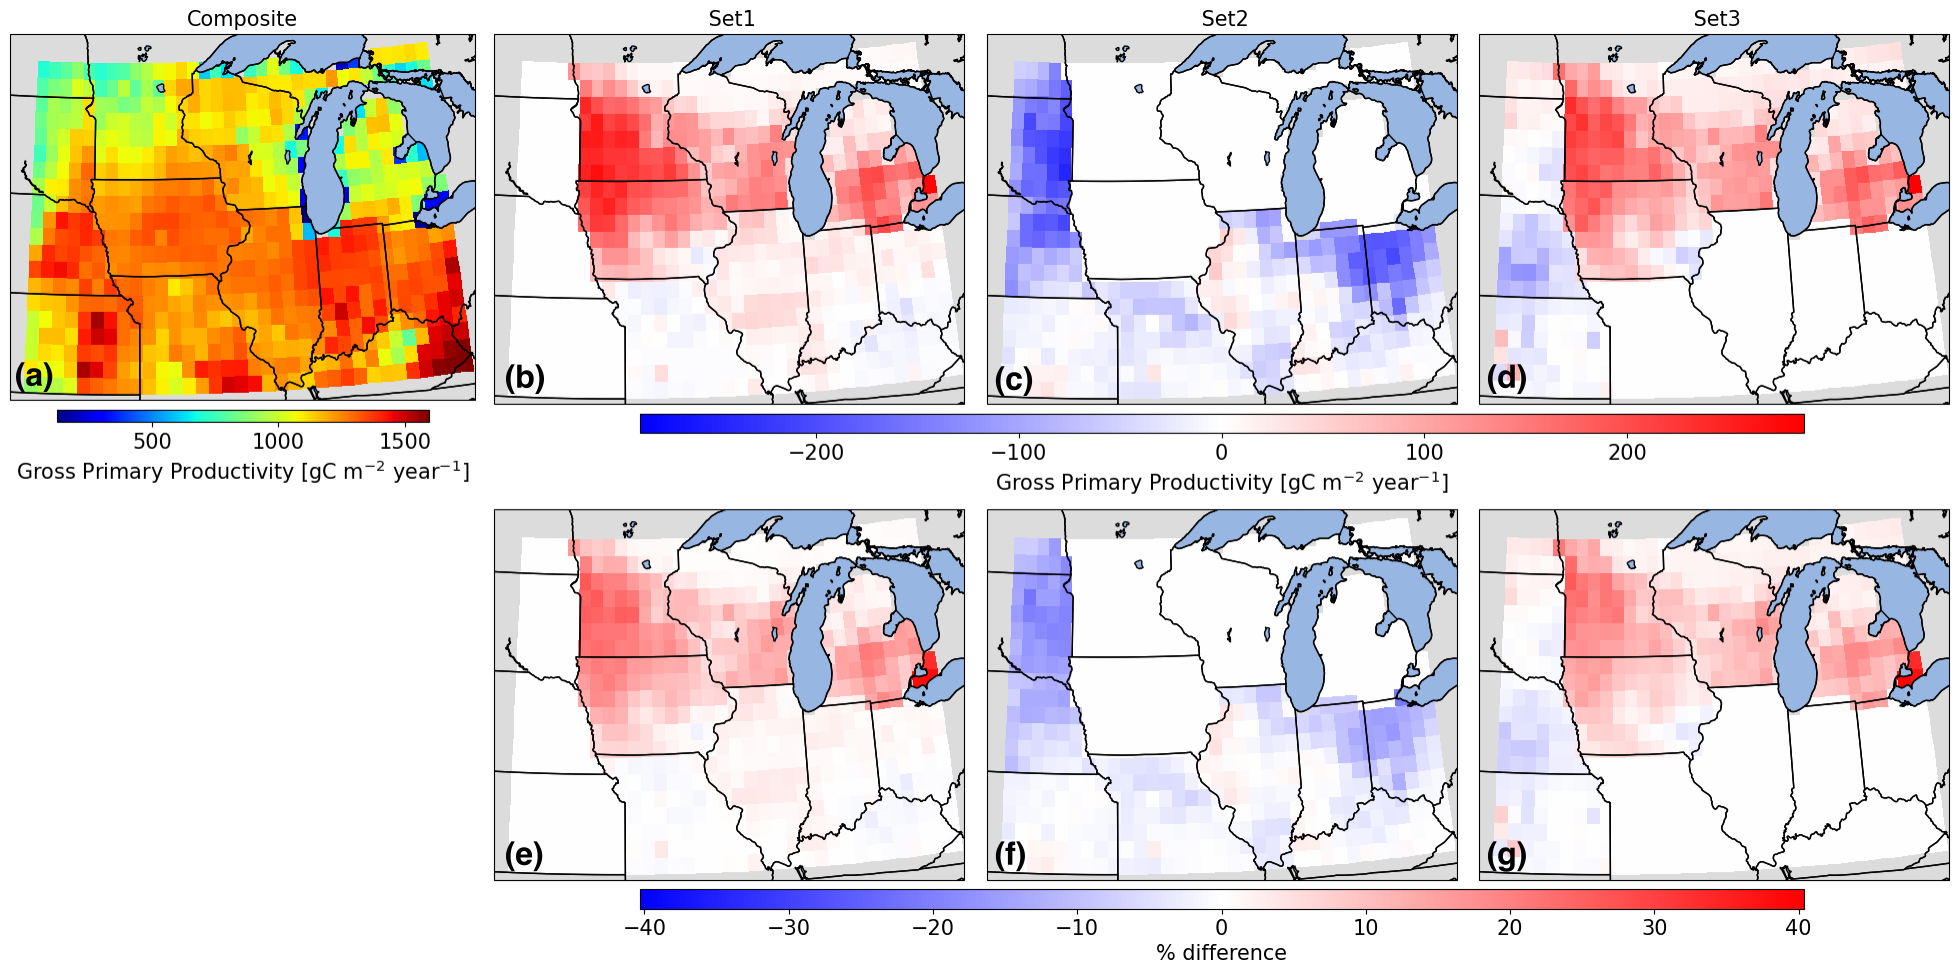 Figure 1. The use of spatially varying as opposed to constant crop parameters can have a large impact on carbon fluxes. The top left sub-panel shows gross primary productivity simulated based on spatially varying parameters. The rest of the sub-panels show the difference (top row) and percent difference (bottom row) between gross primary productivity simulated using spatially varying and constant parameters.